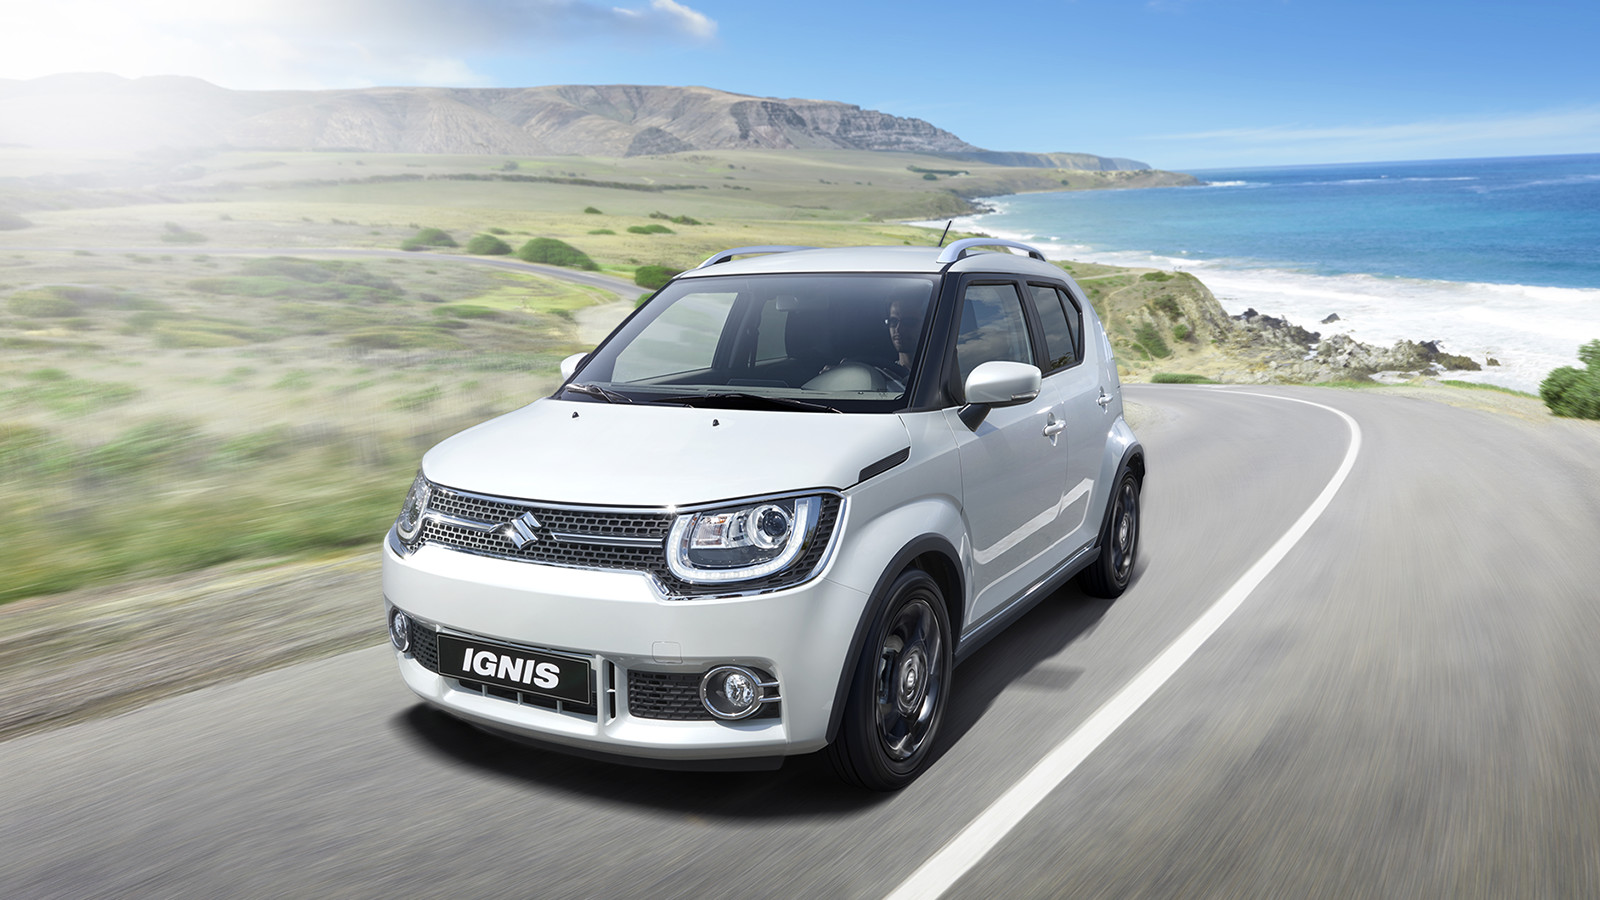 Top Key Points To Know About The Upcoming Maruti Suzuki Ignis Picture, Photo, Wallpaper. Top Speed India